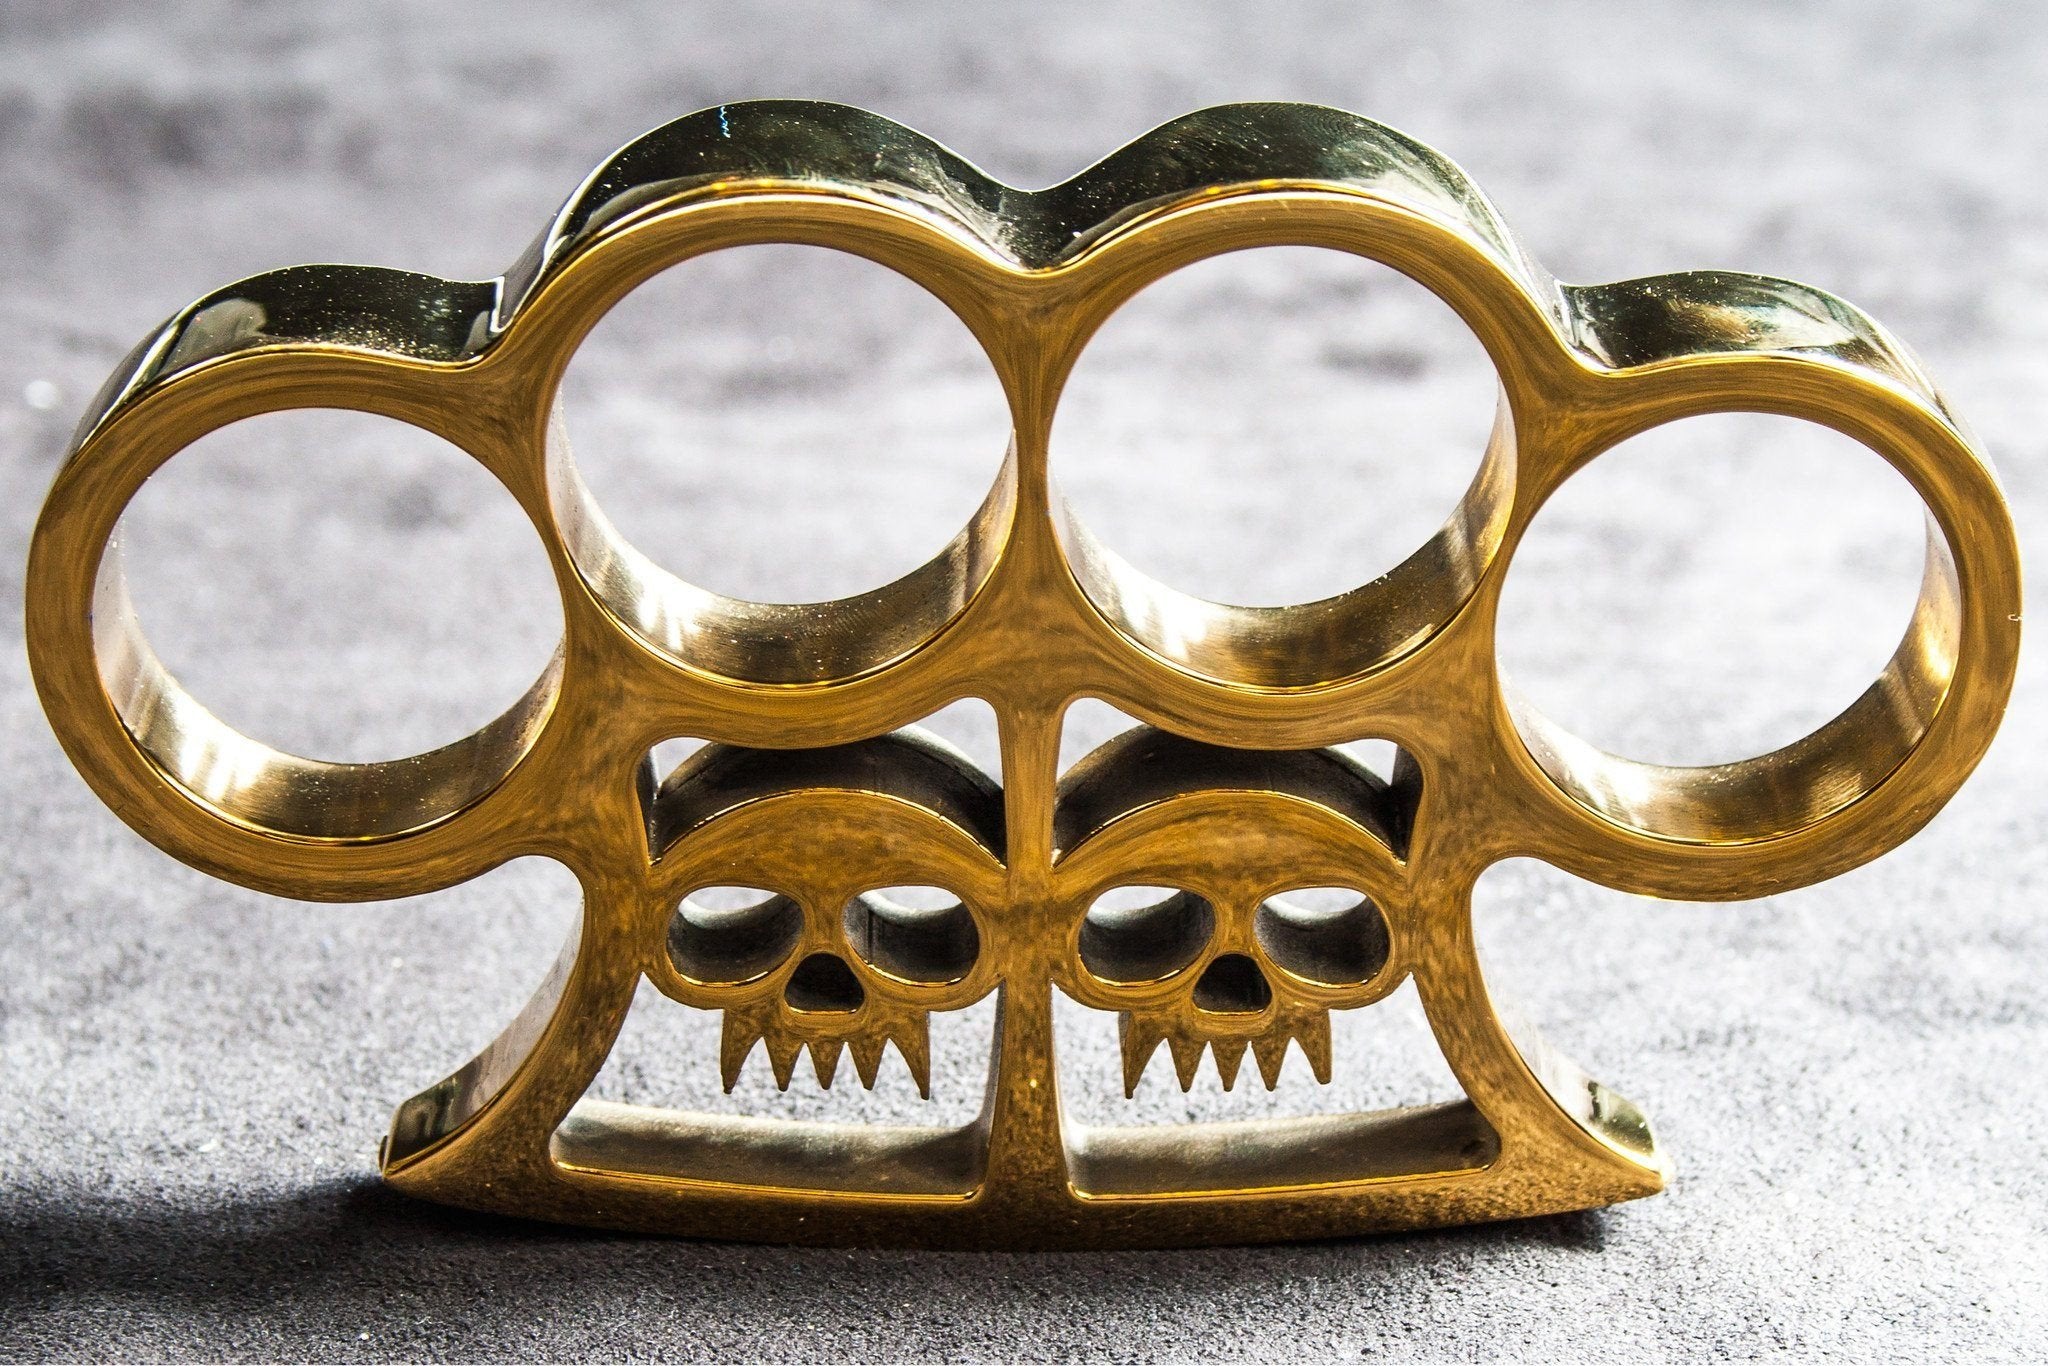 Are Brass Knuckles Illegal? Knockout Knucks